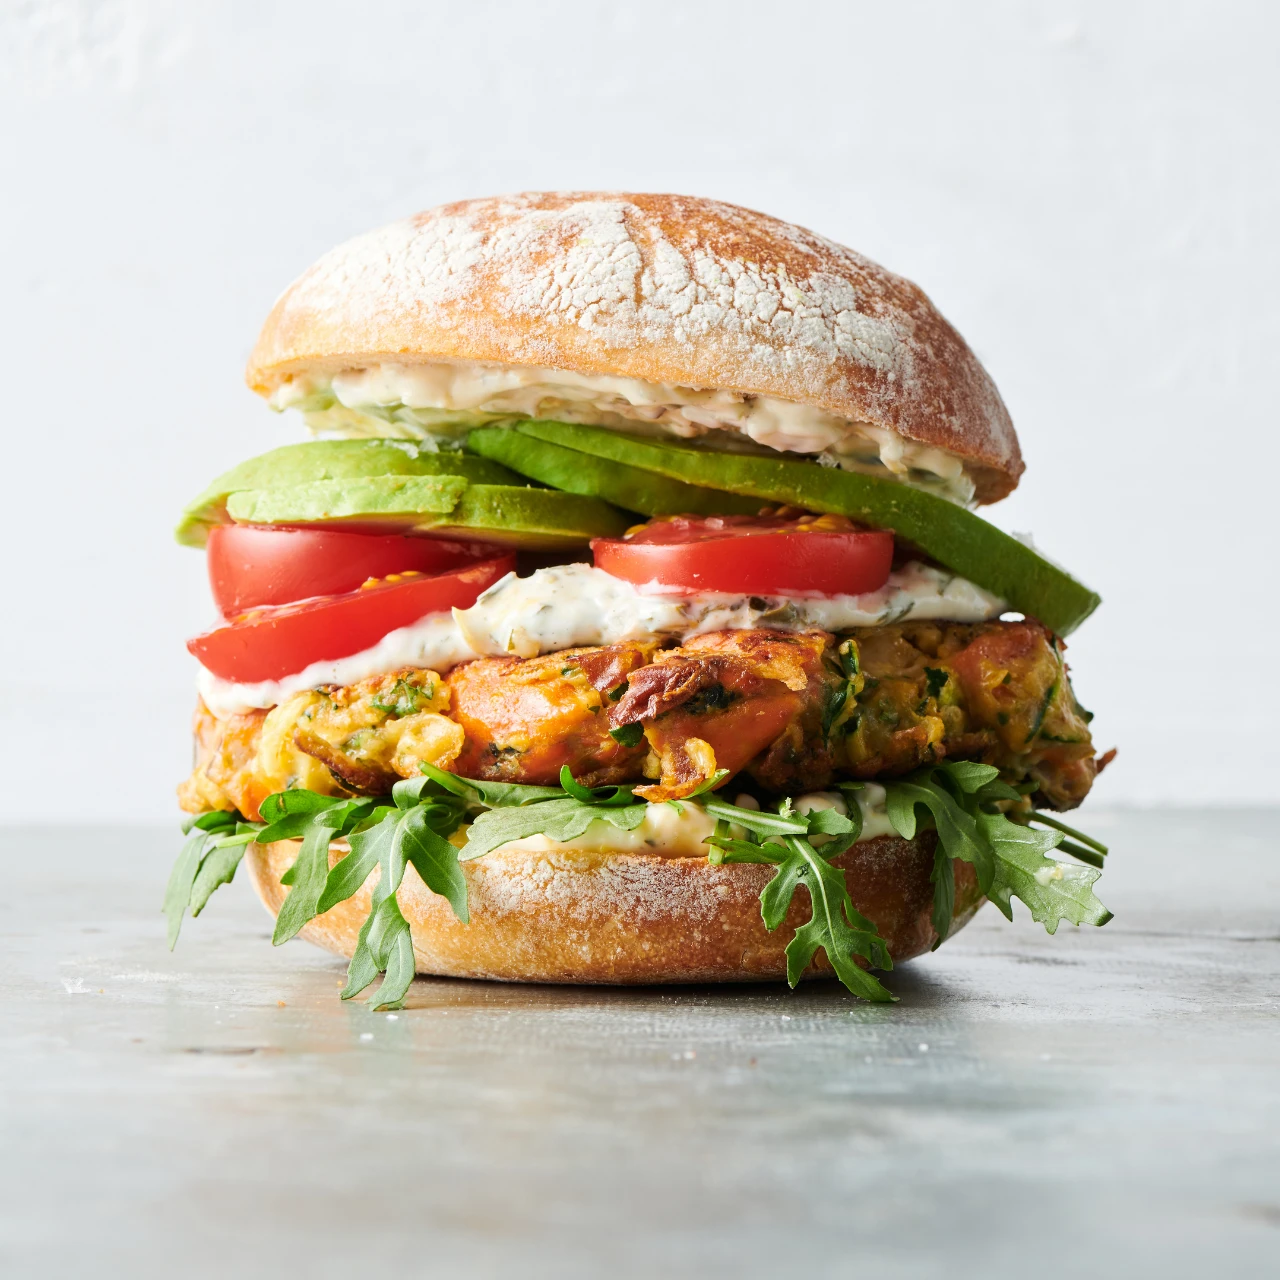 One of our best burger recipes! Try our Greenshell Mussel and Zucchini Burger. It's juicy and tasty all in one.